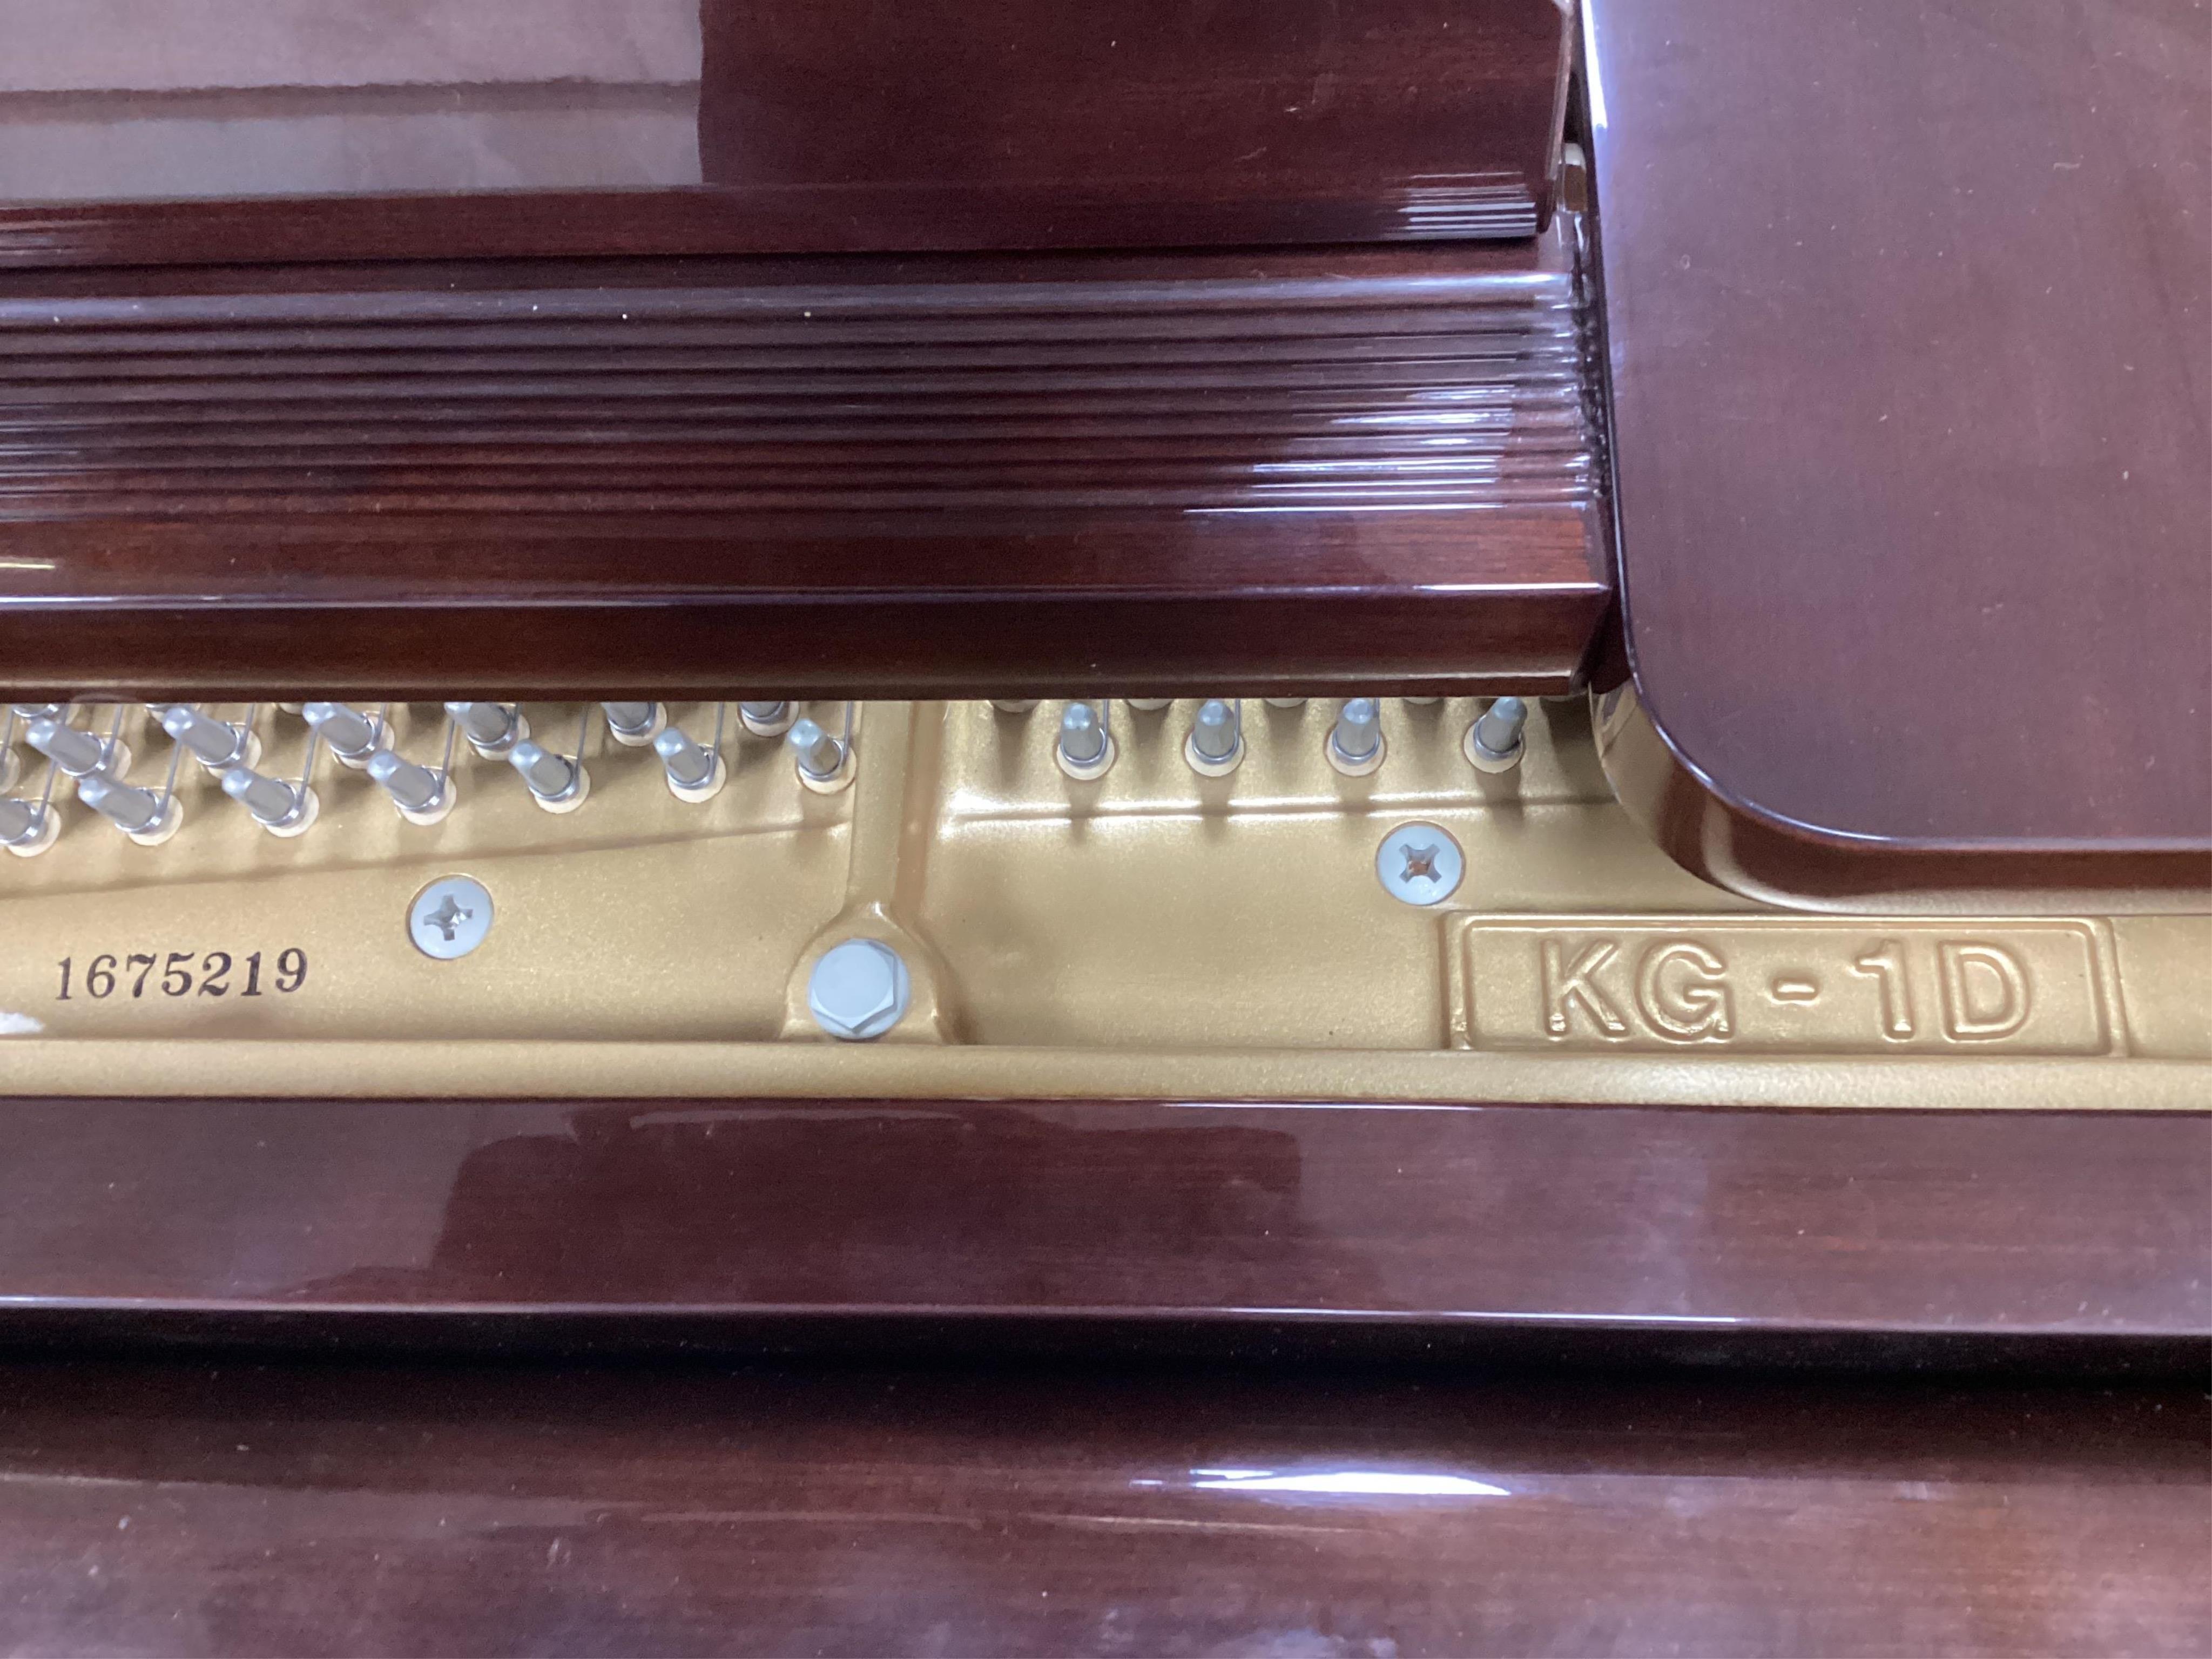 A Kawai KG-ID 5ft grand piano (c.1986), serial number 1675219, mahogany cased on square tapered legs, width 149cm, height 101cm, with adjustable stool. Condition - piano good